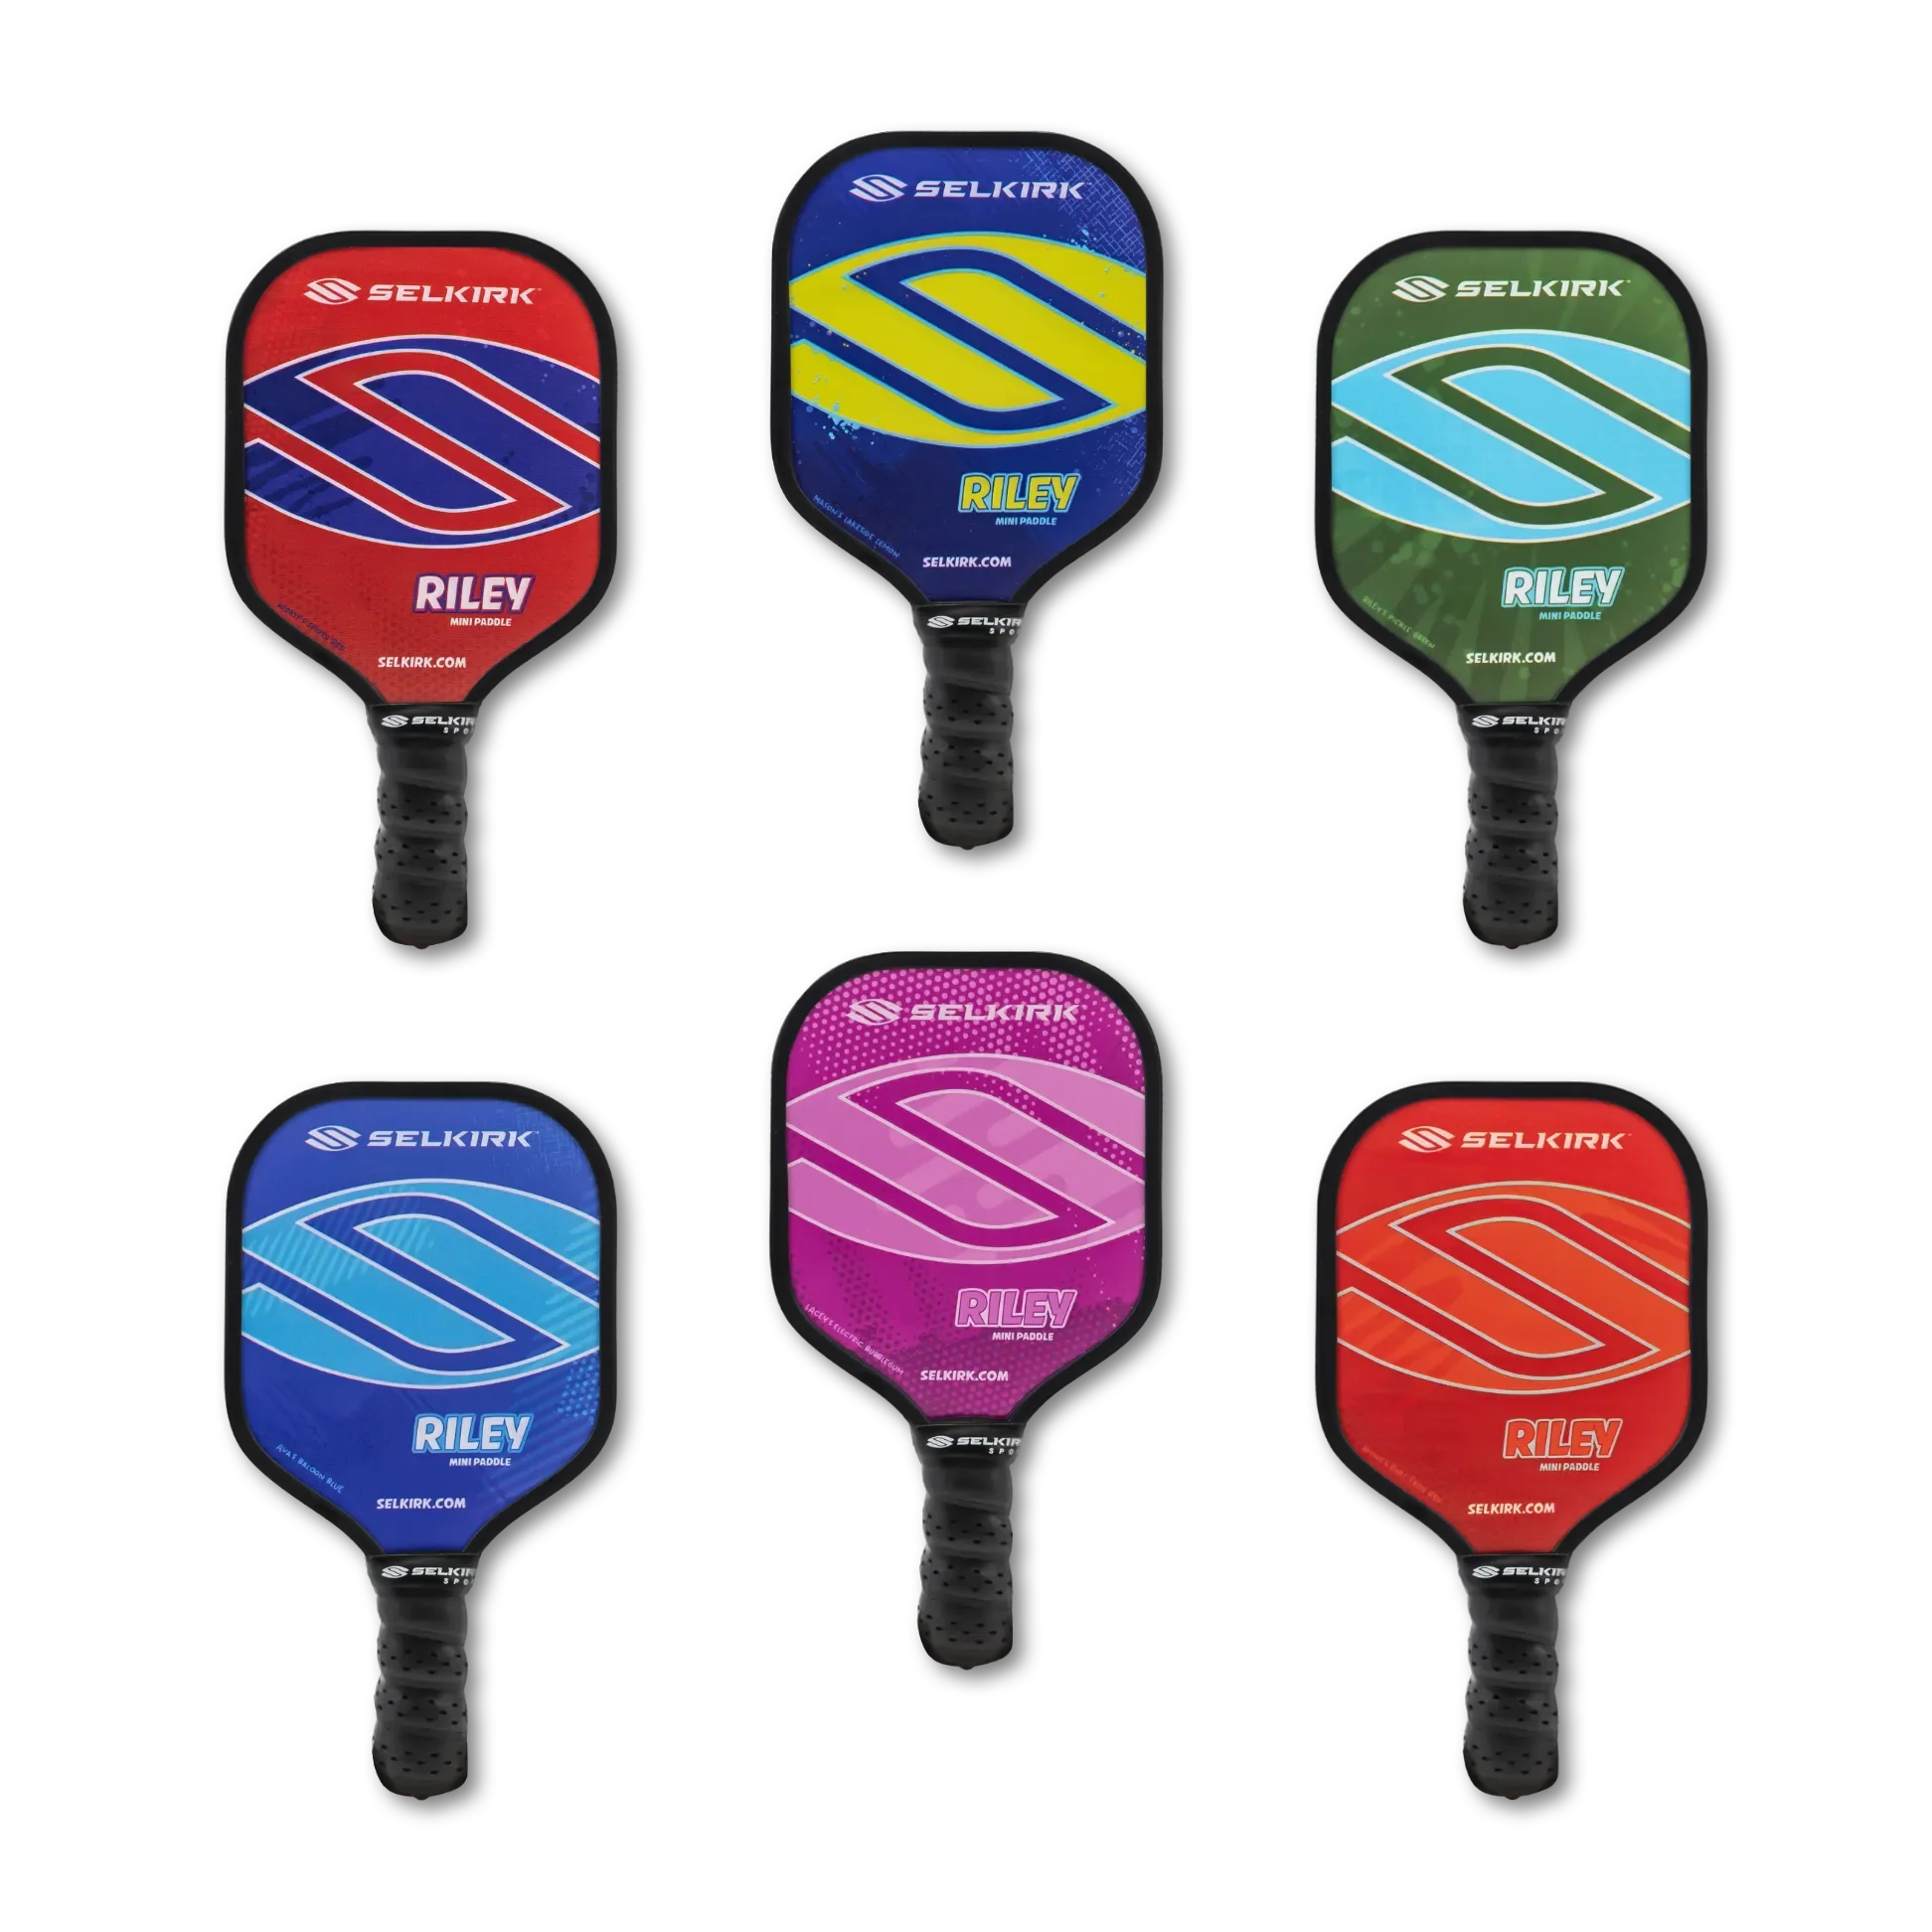 The Selkirk Riley Mini Pickleball Paddle Collection offers a novel gift option featuring six different colored paddles on a black background.